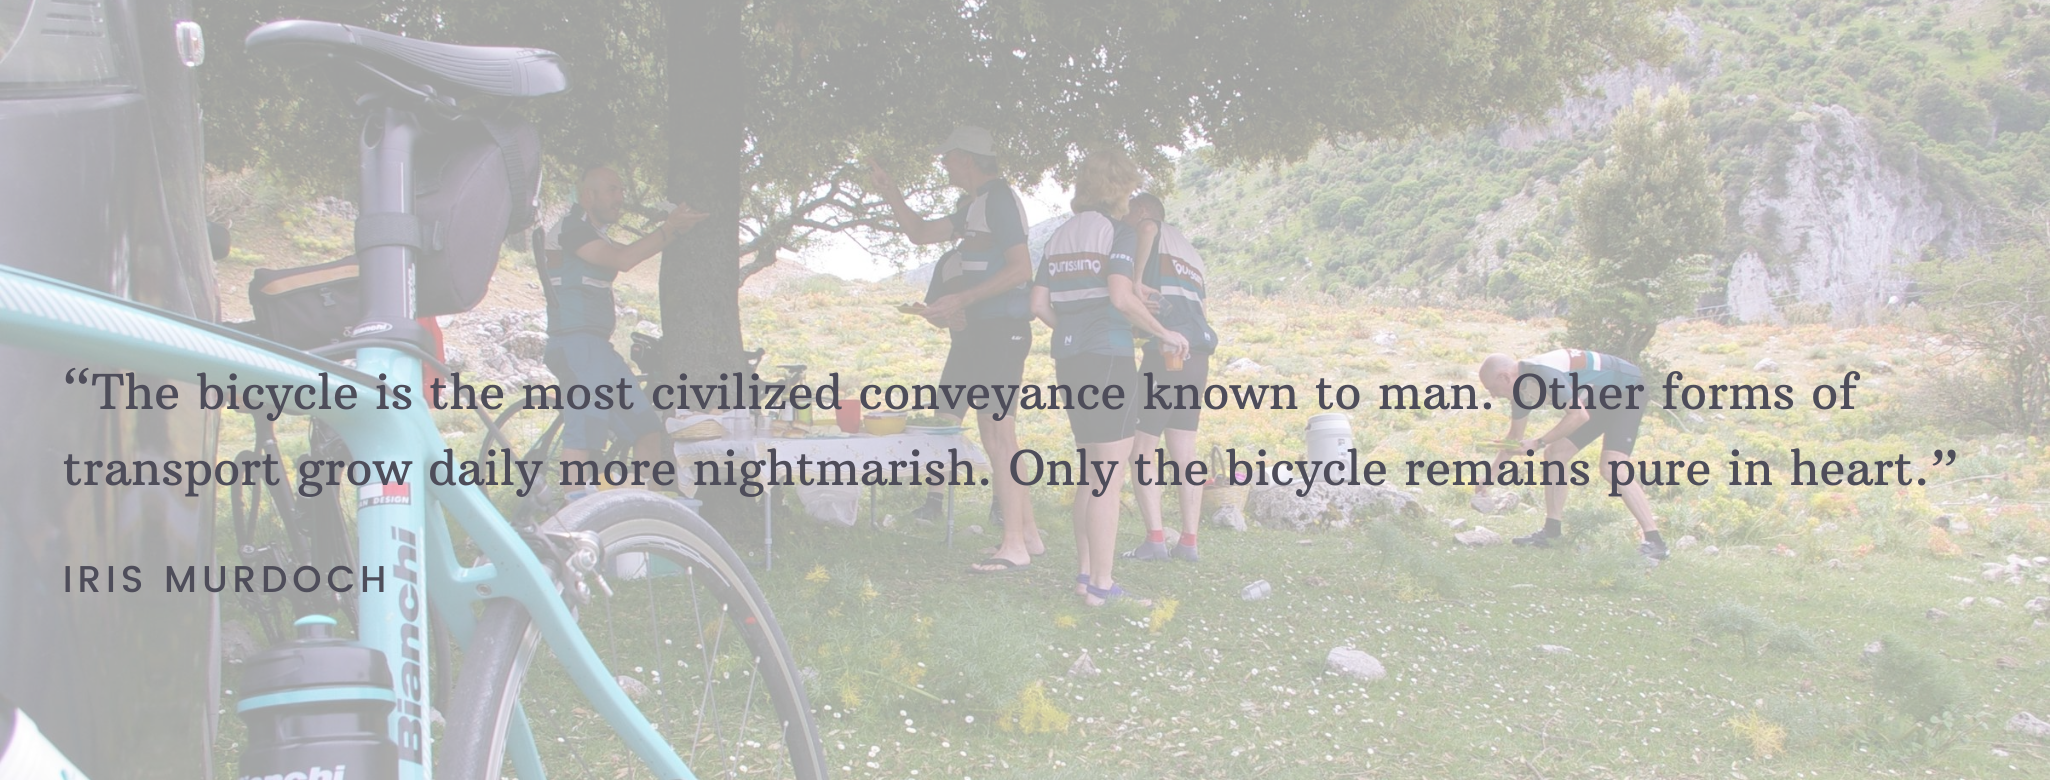 Cycling Quotes Murdoch revised